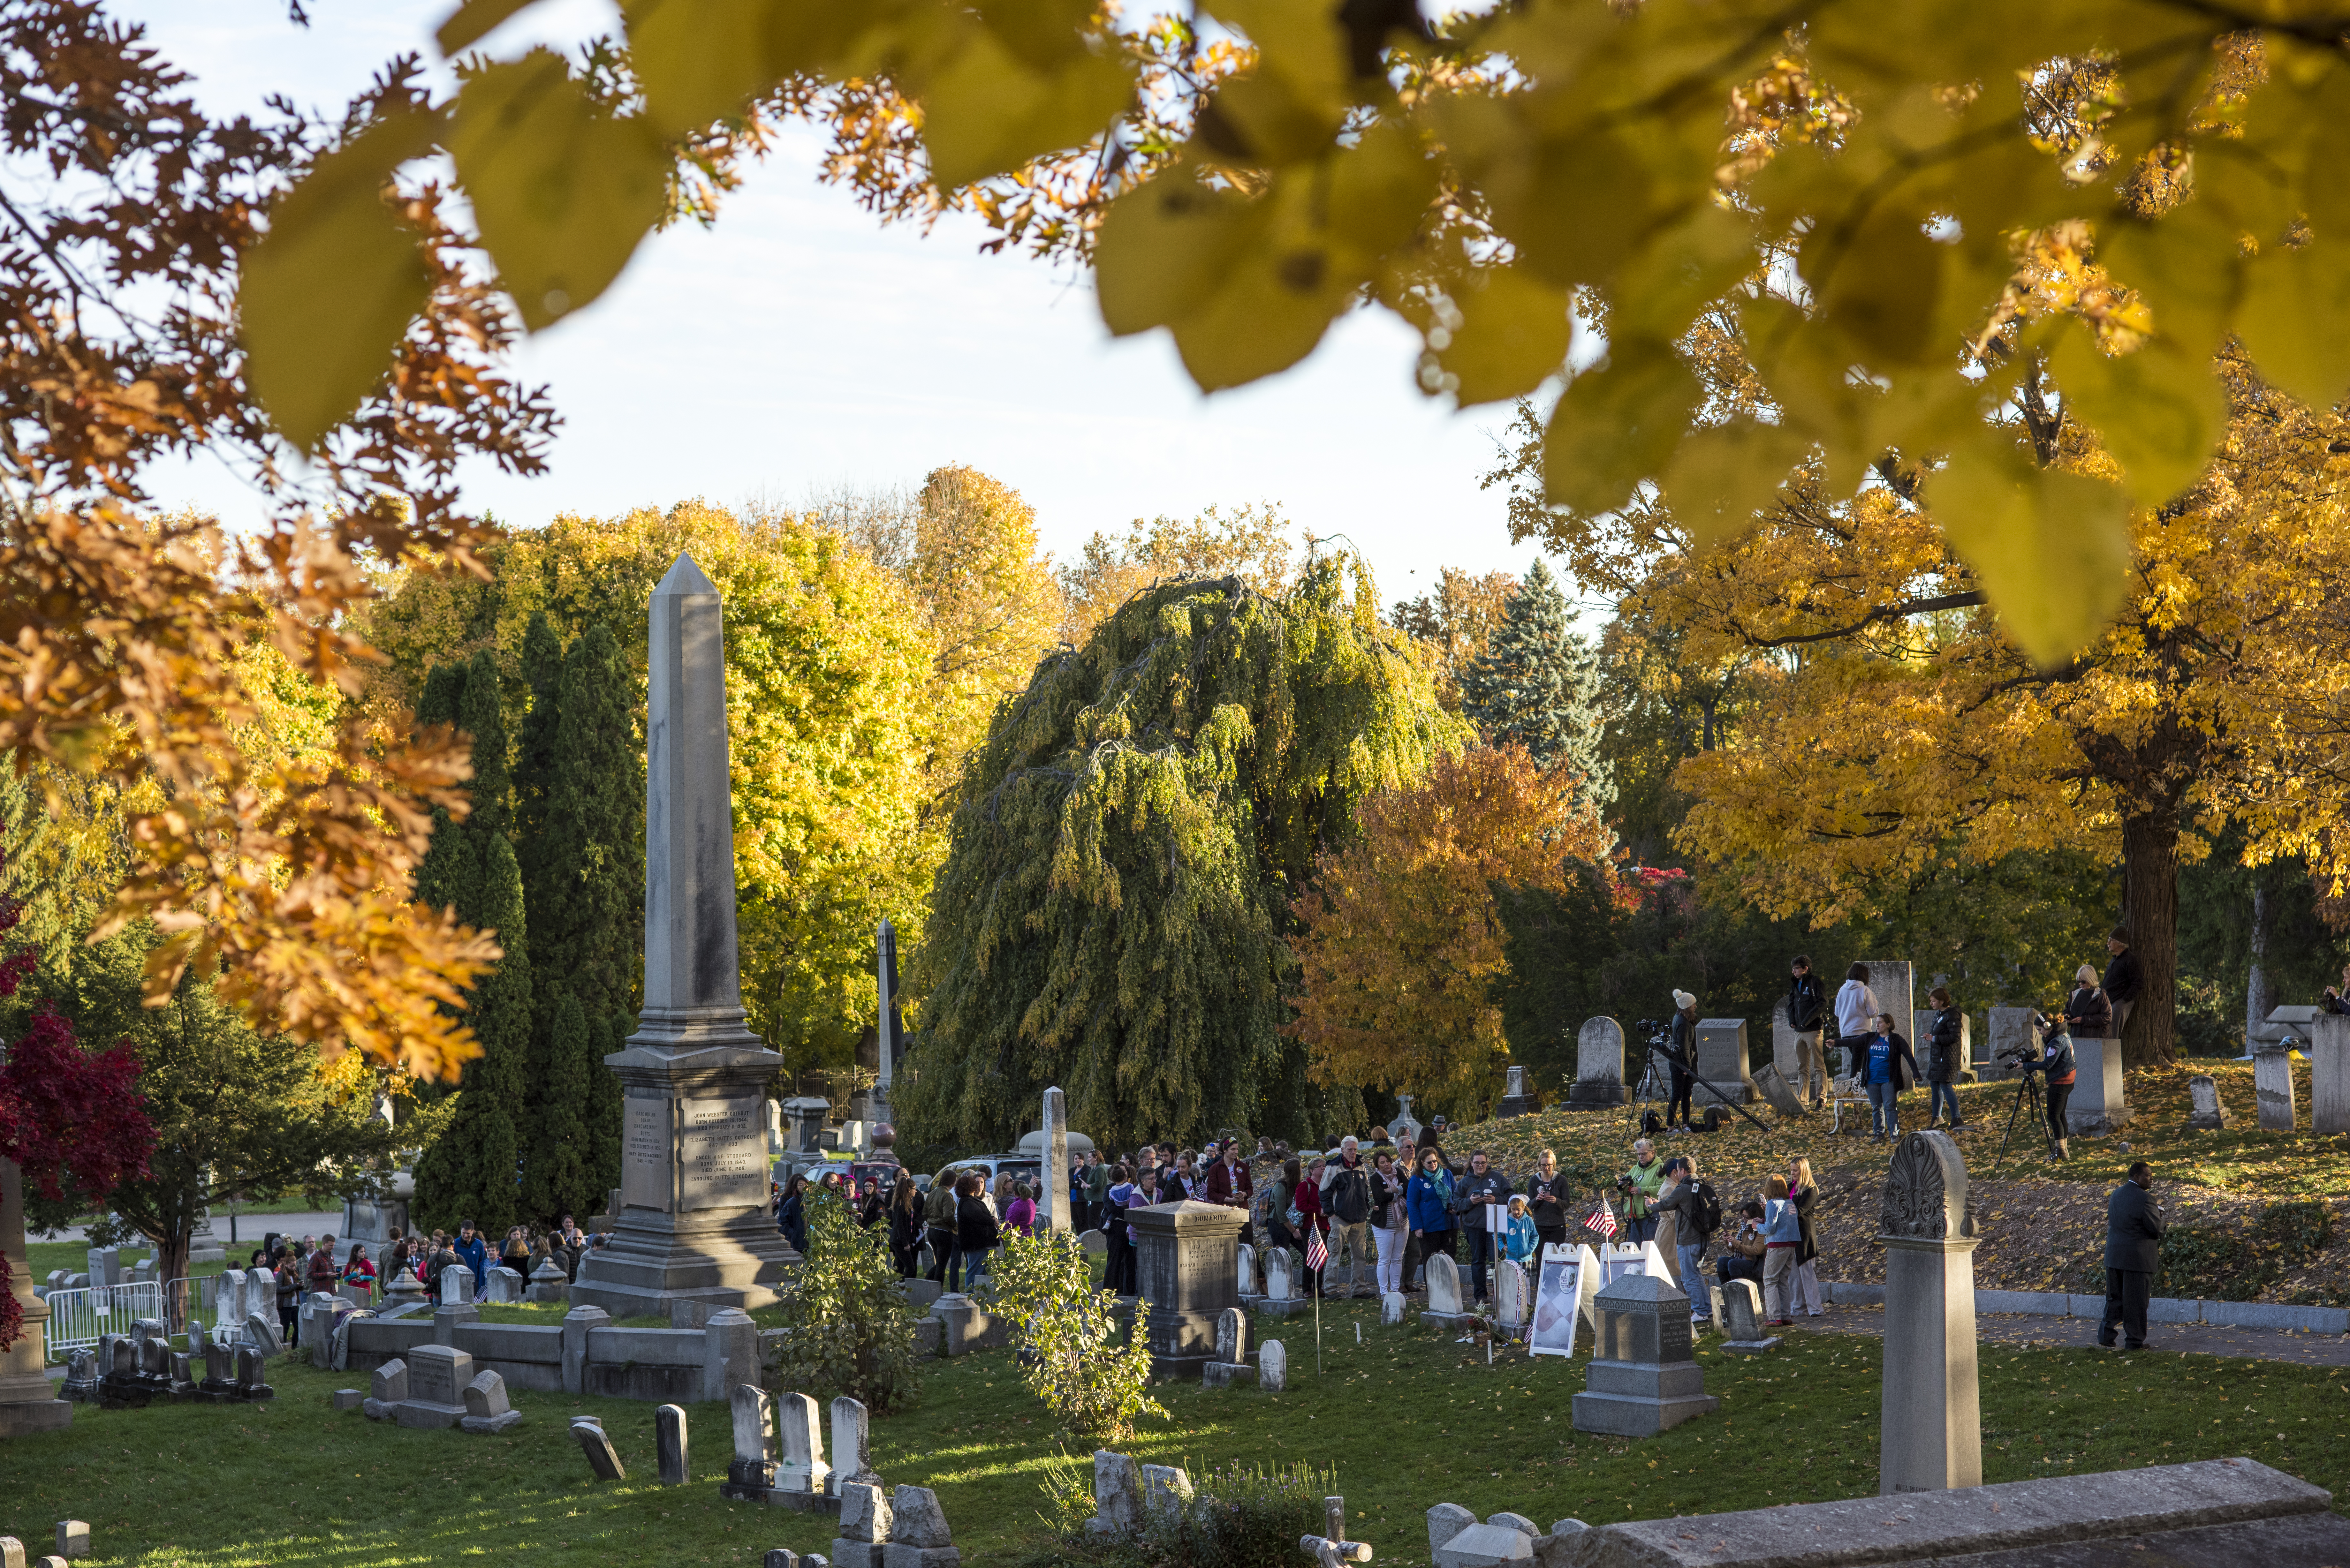 By lunchtime, the line to visit the grave site of Susan B. Anthony stretched across Mt. Hope Cemetery on a beautiful fall day in Rochester. (University photo / J. Adam Fenster)